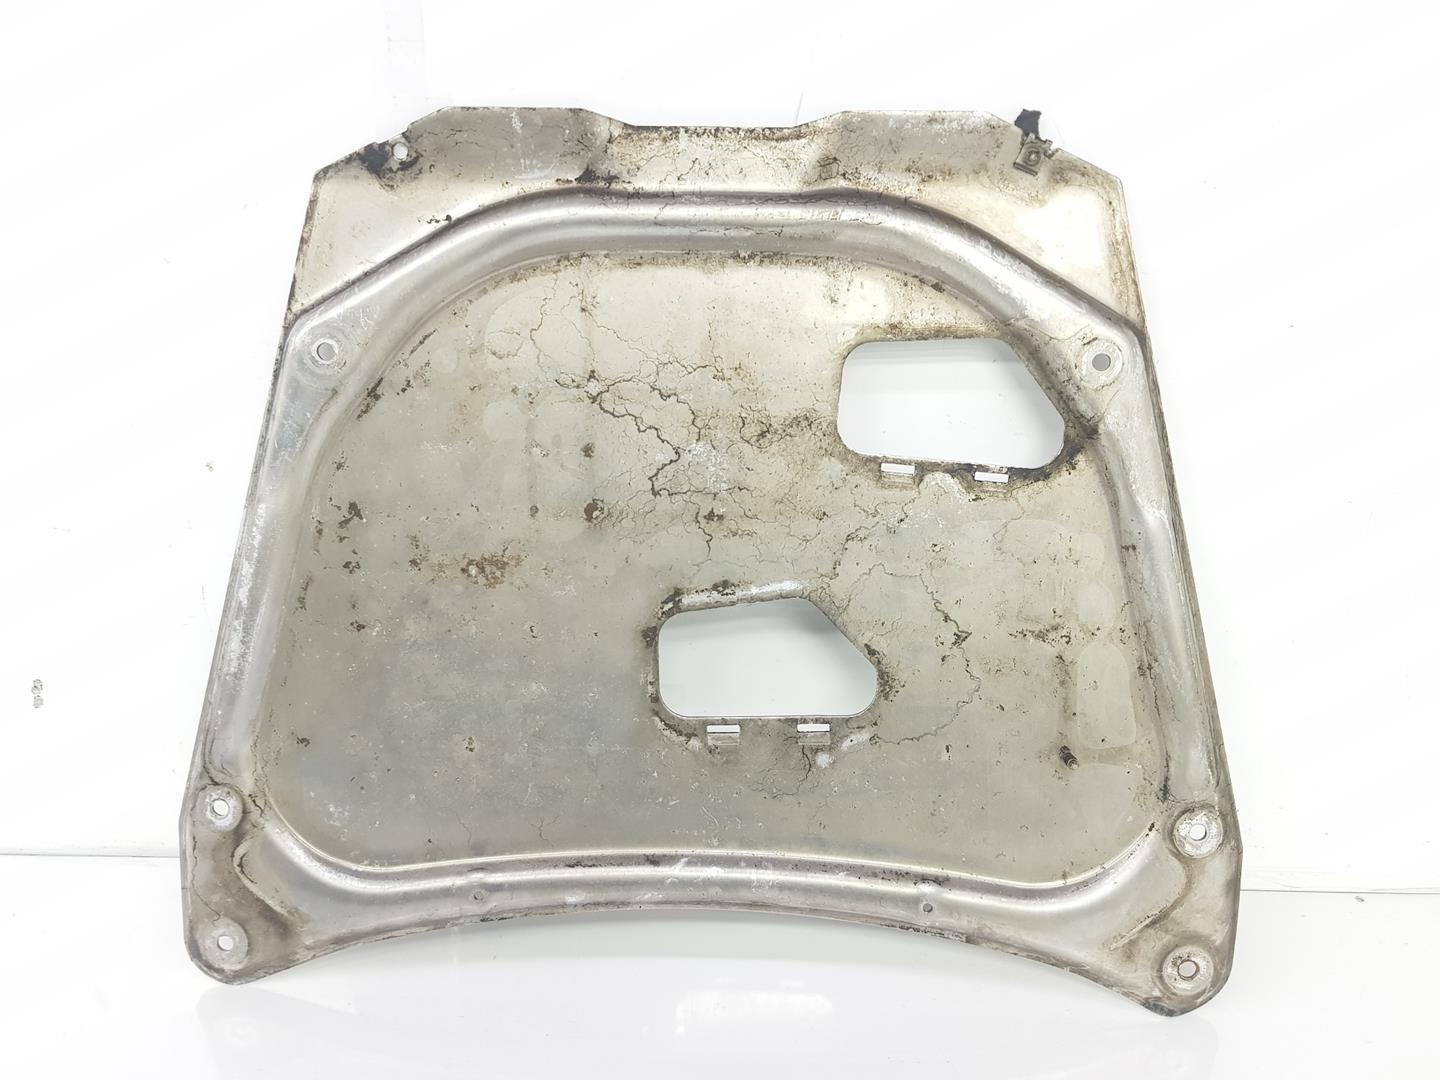 BMW X5 E53 (1999-2006) Front Engine Cover 31101095656, 31101095656 19889005